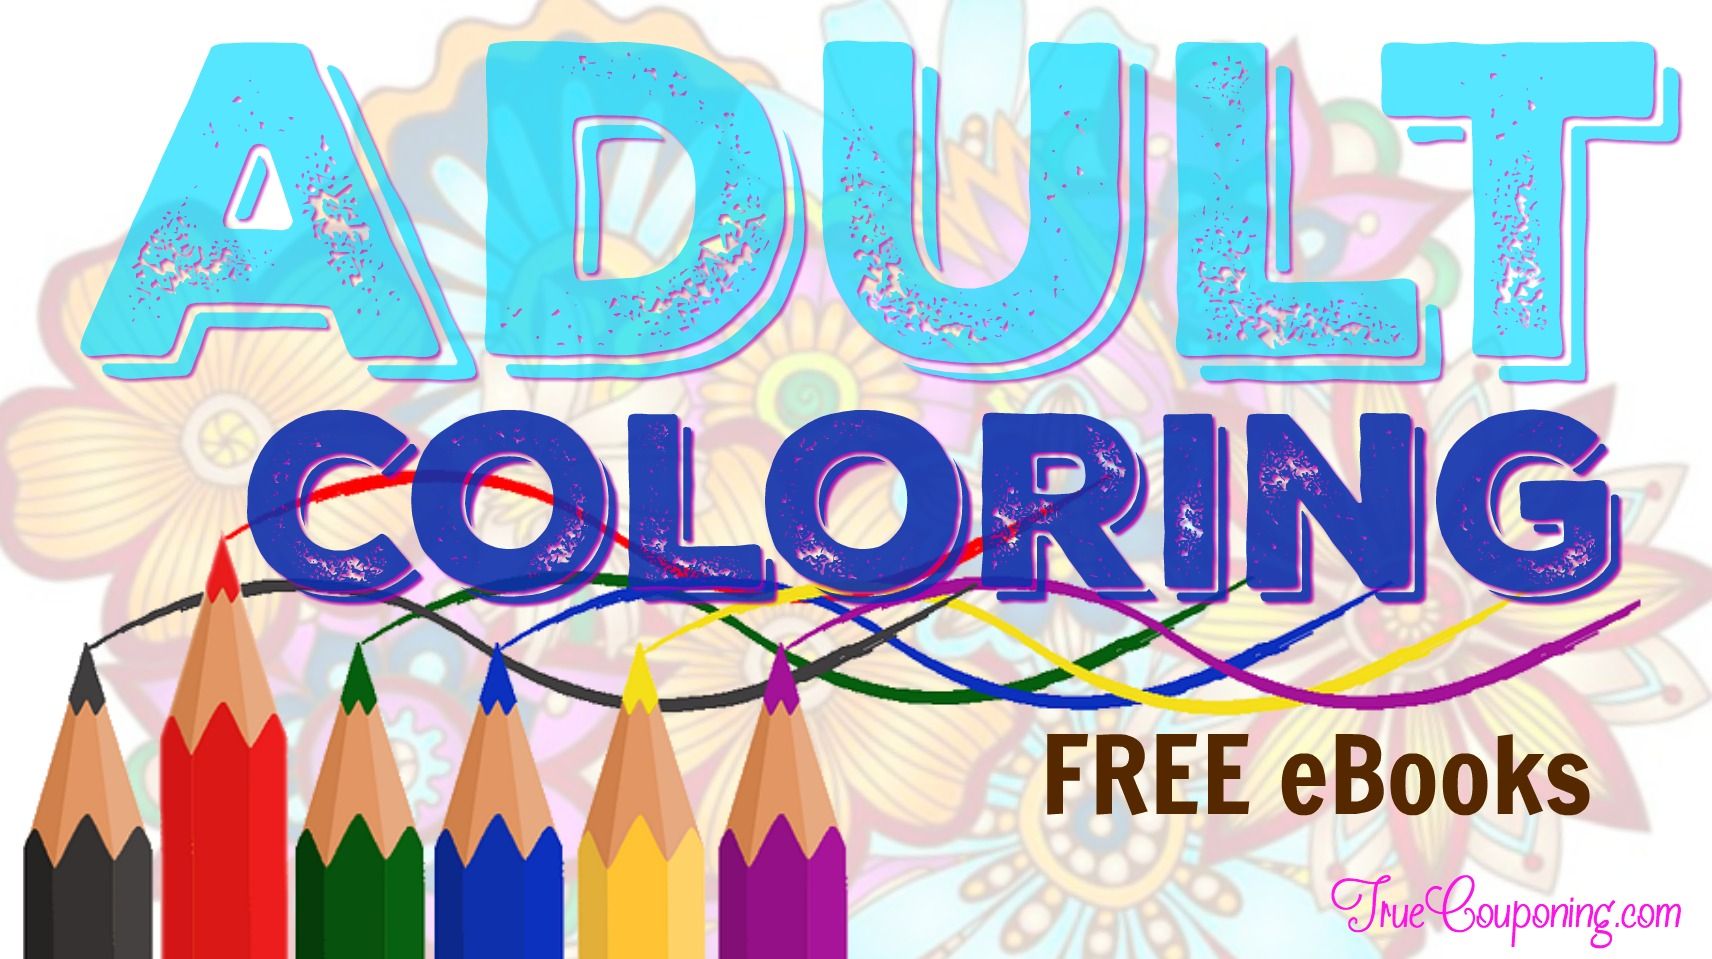 Limited Time FREE TEN eBooks Adult Coloring Books Bundle! A $63.75 Value!